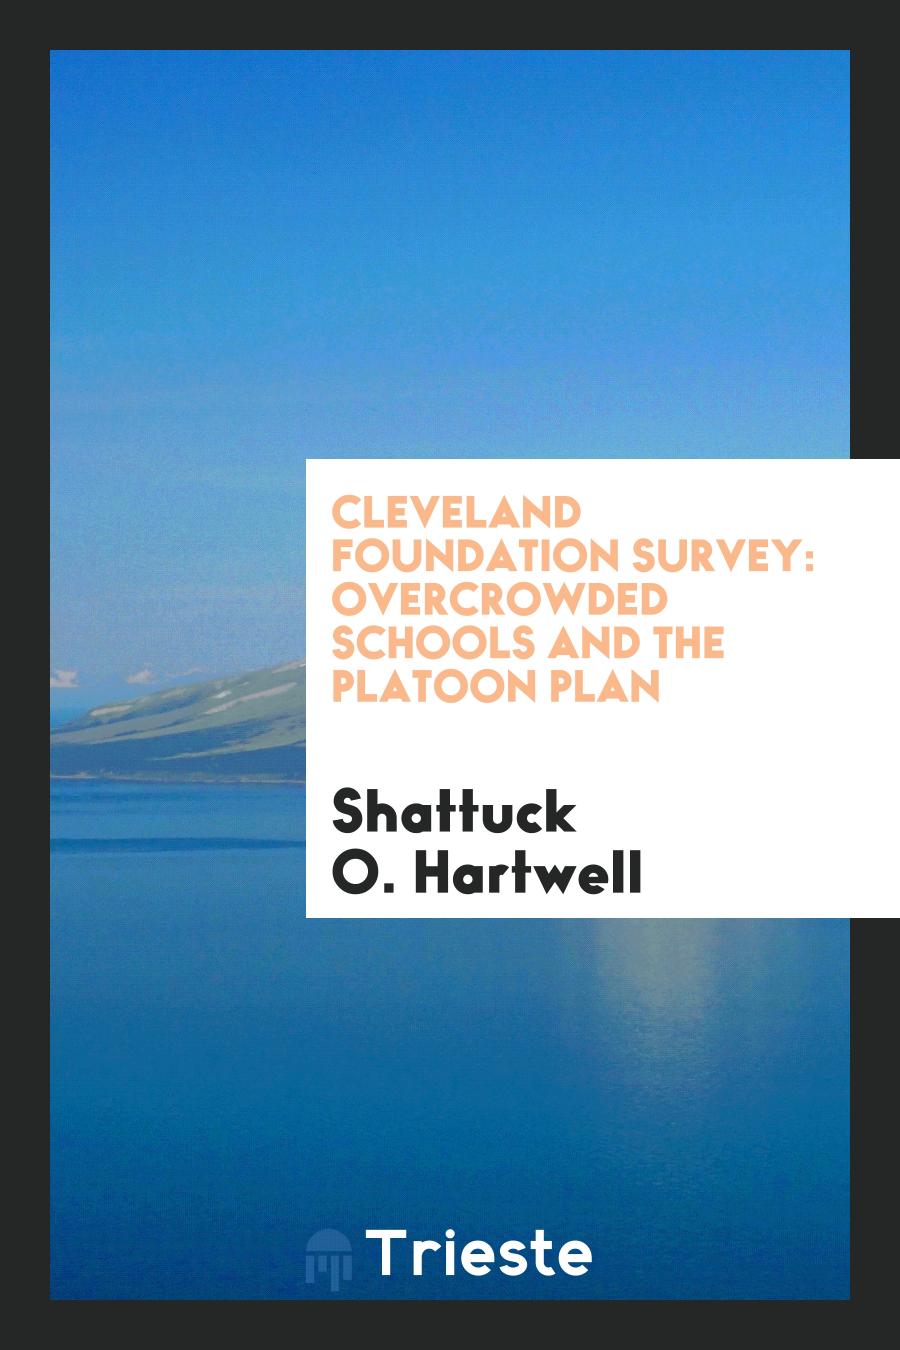 Cleveland Foundation Survey: Overcrowded schools and the platoon plan